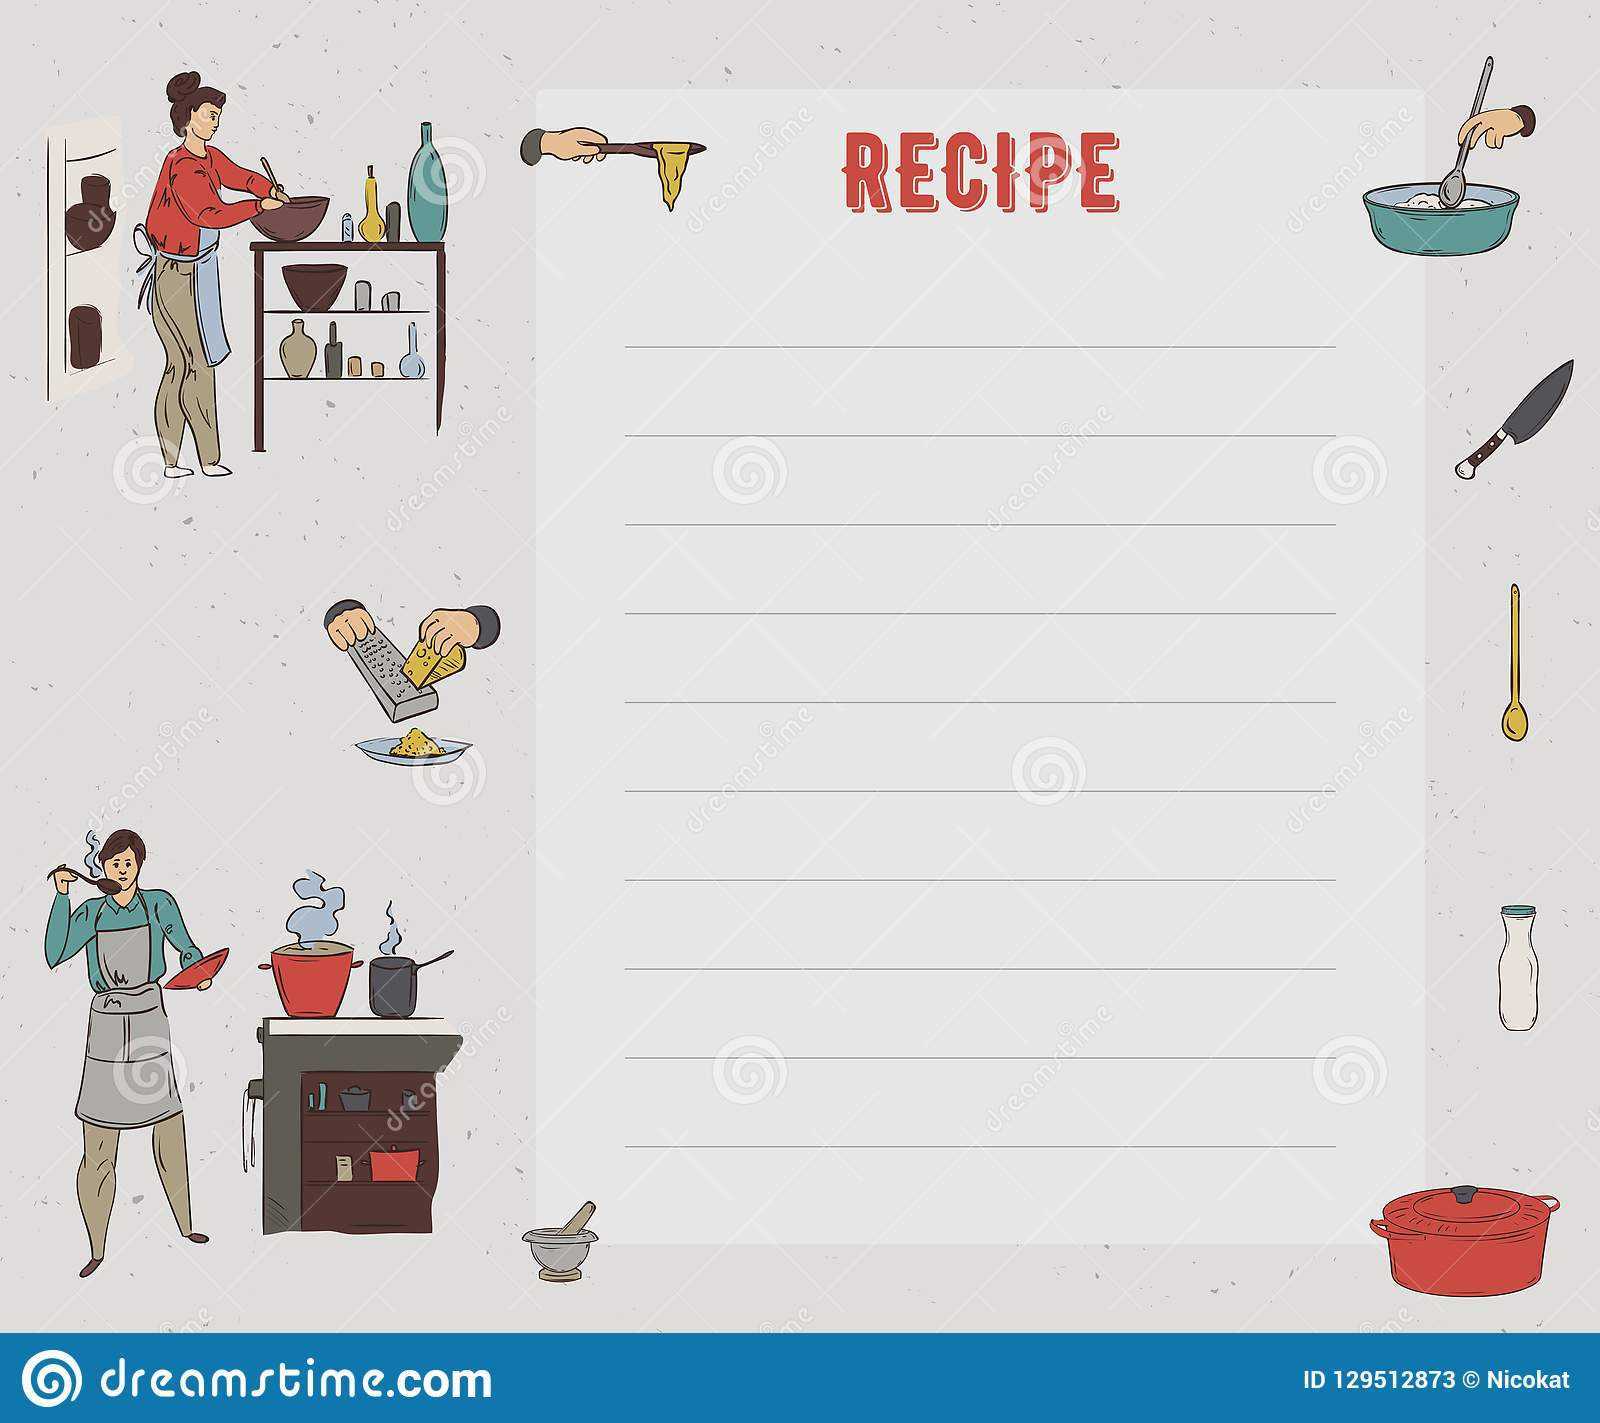 Recipe Card. Cookbook Page. Design Template With People Intended For Restaurant Recipe Card Template